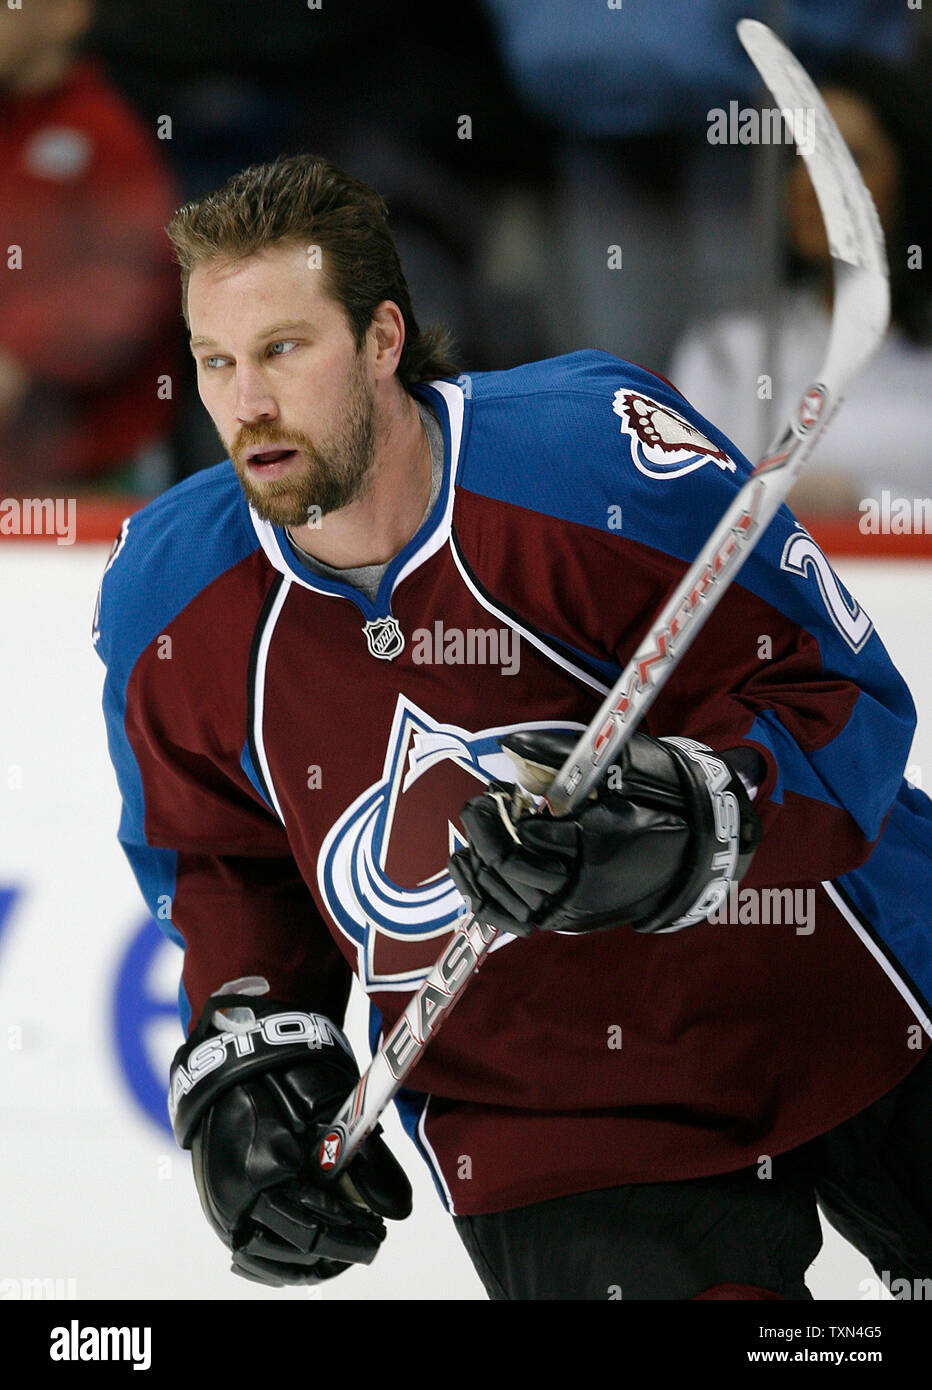 Search results for: 'peter forsberg